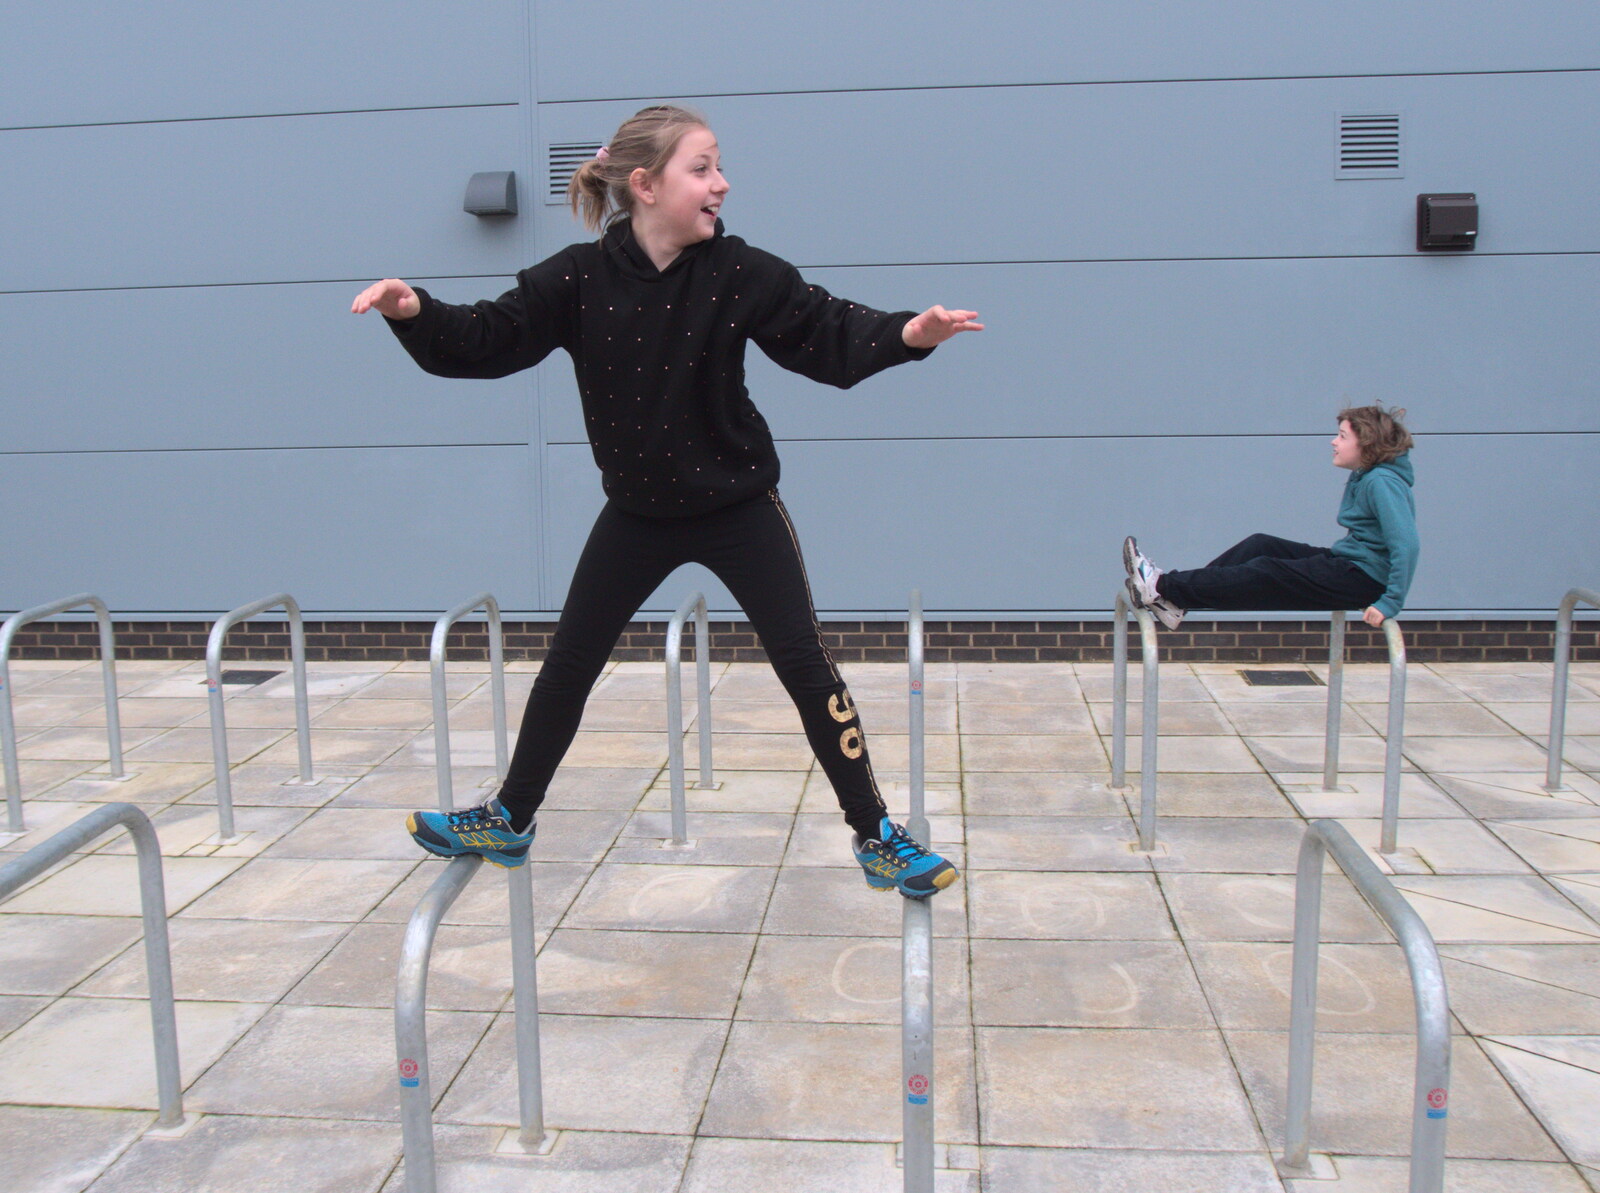 Soph does some balancing from Clip and Climb, The Havens, Ipswich - 15th February 2020